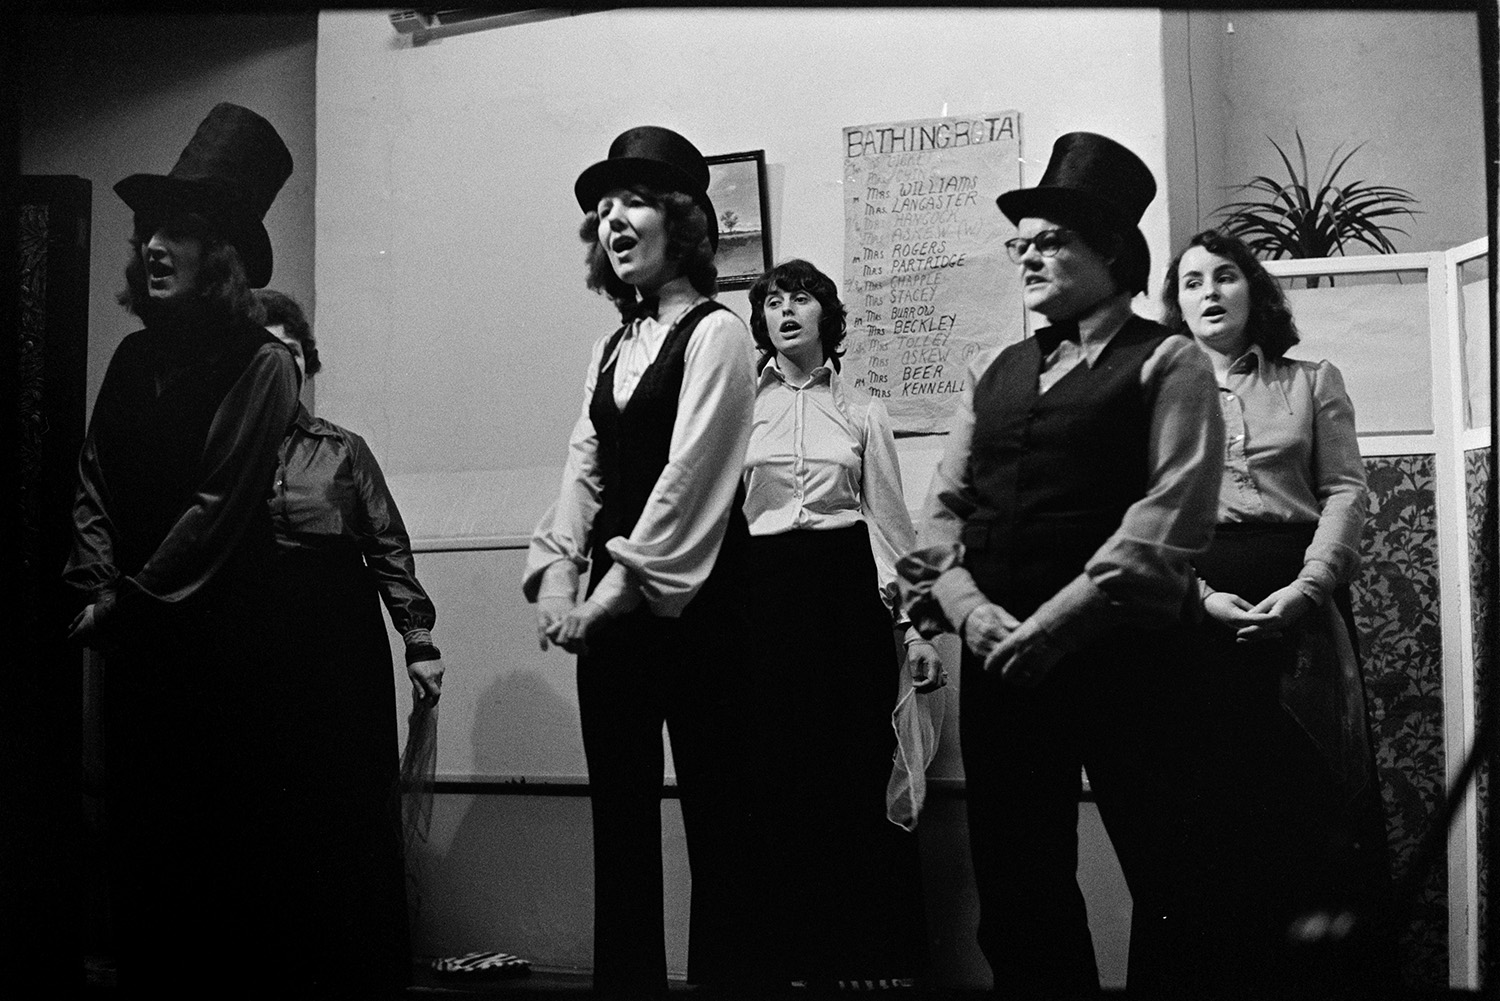 Christmas Show in village hall Musical turns.
[A group of singers, some wearing top hats, performing in the Christmas Show in Merton Village Hall. On the wall behind the singers a poster with a 'Bathing Rota' can be seen.]